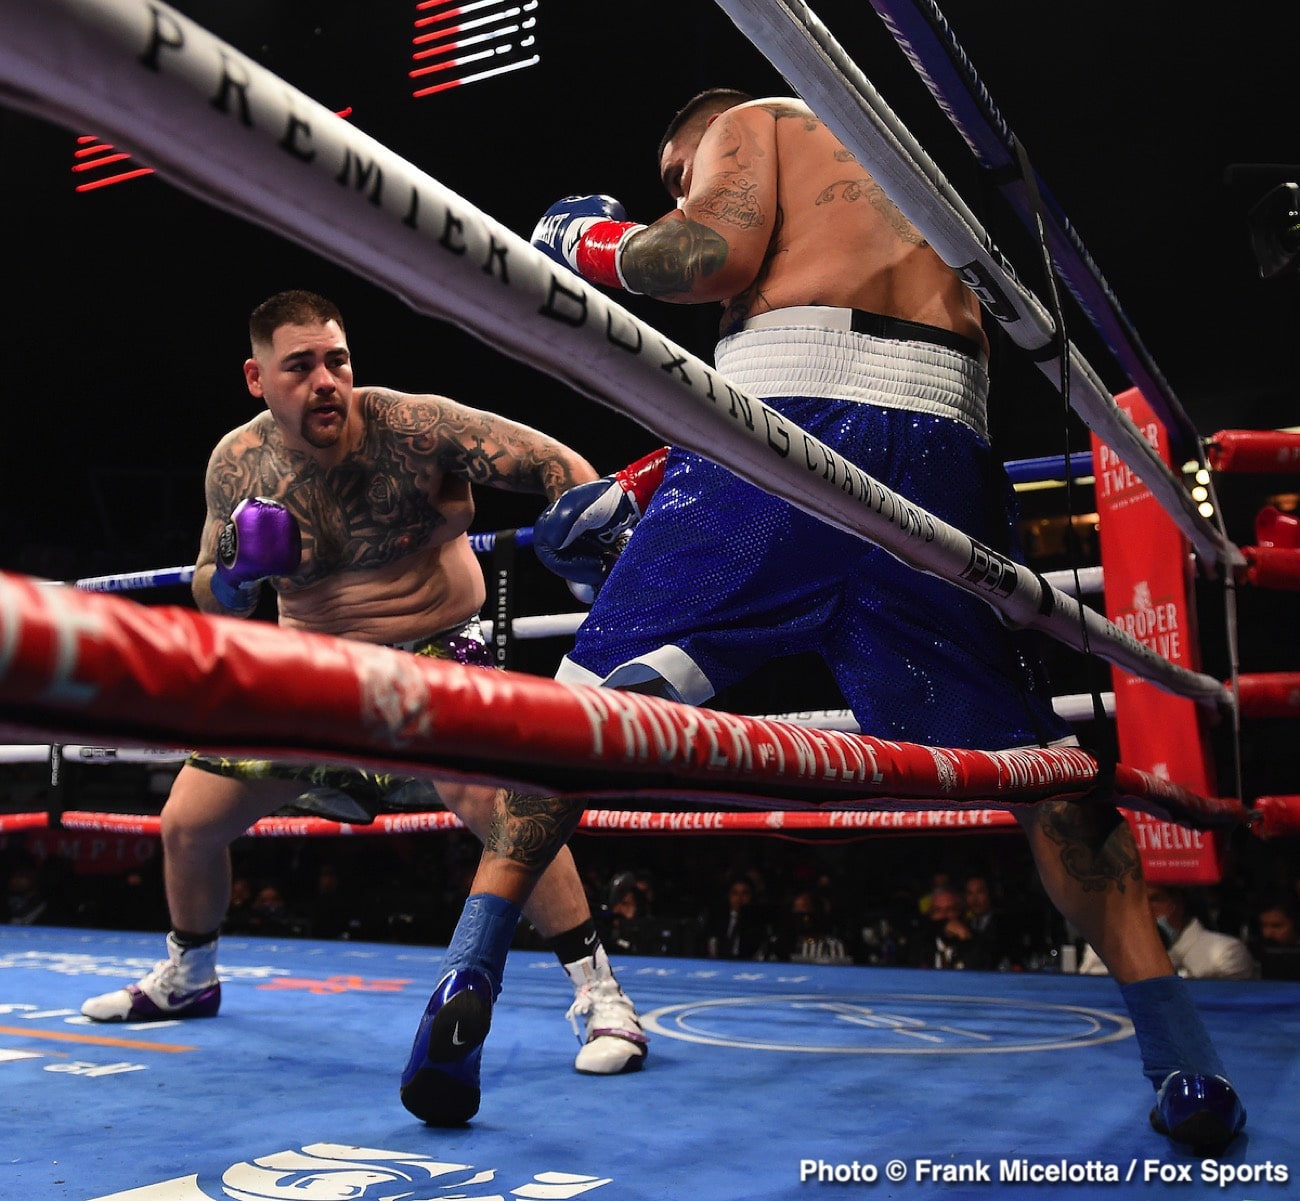 Image: Andy Ruiz Jr. to return to action, says "Fight date" to be announced